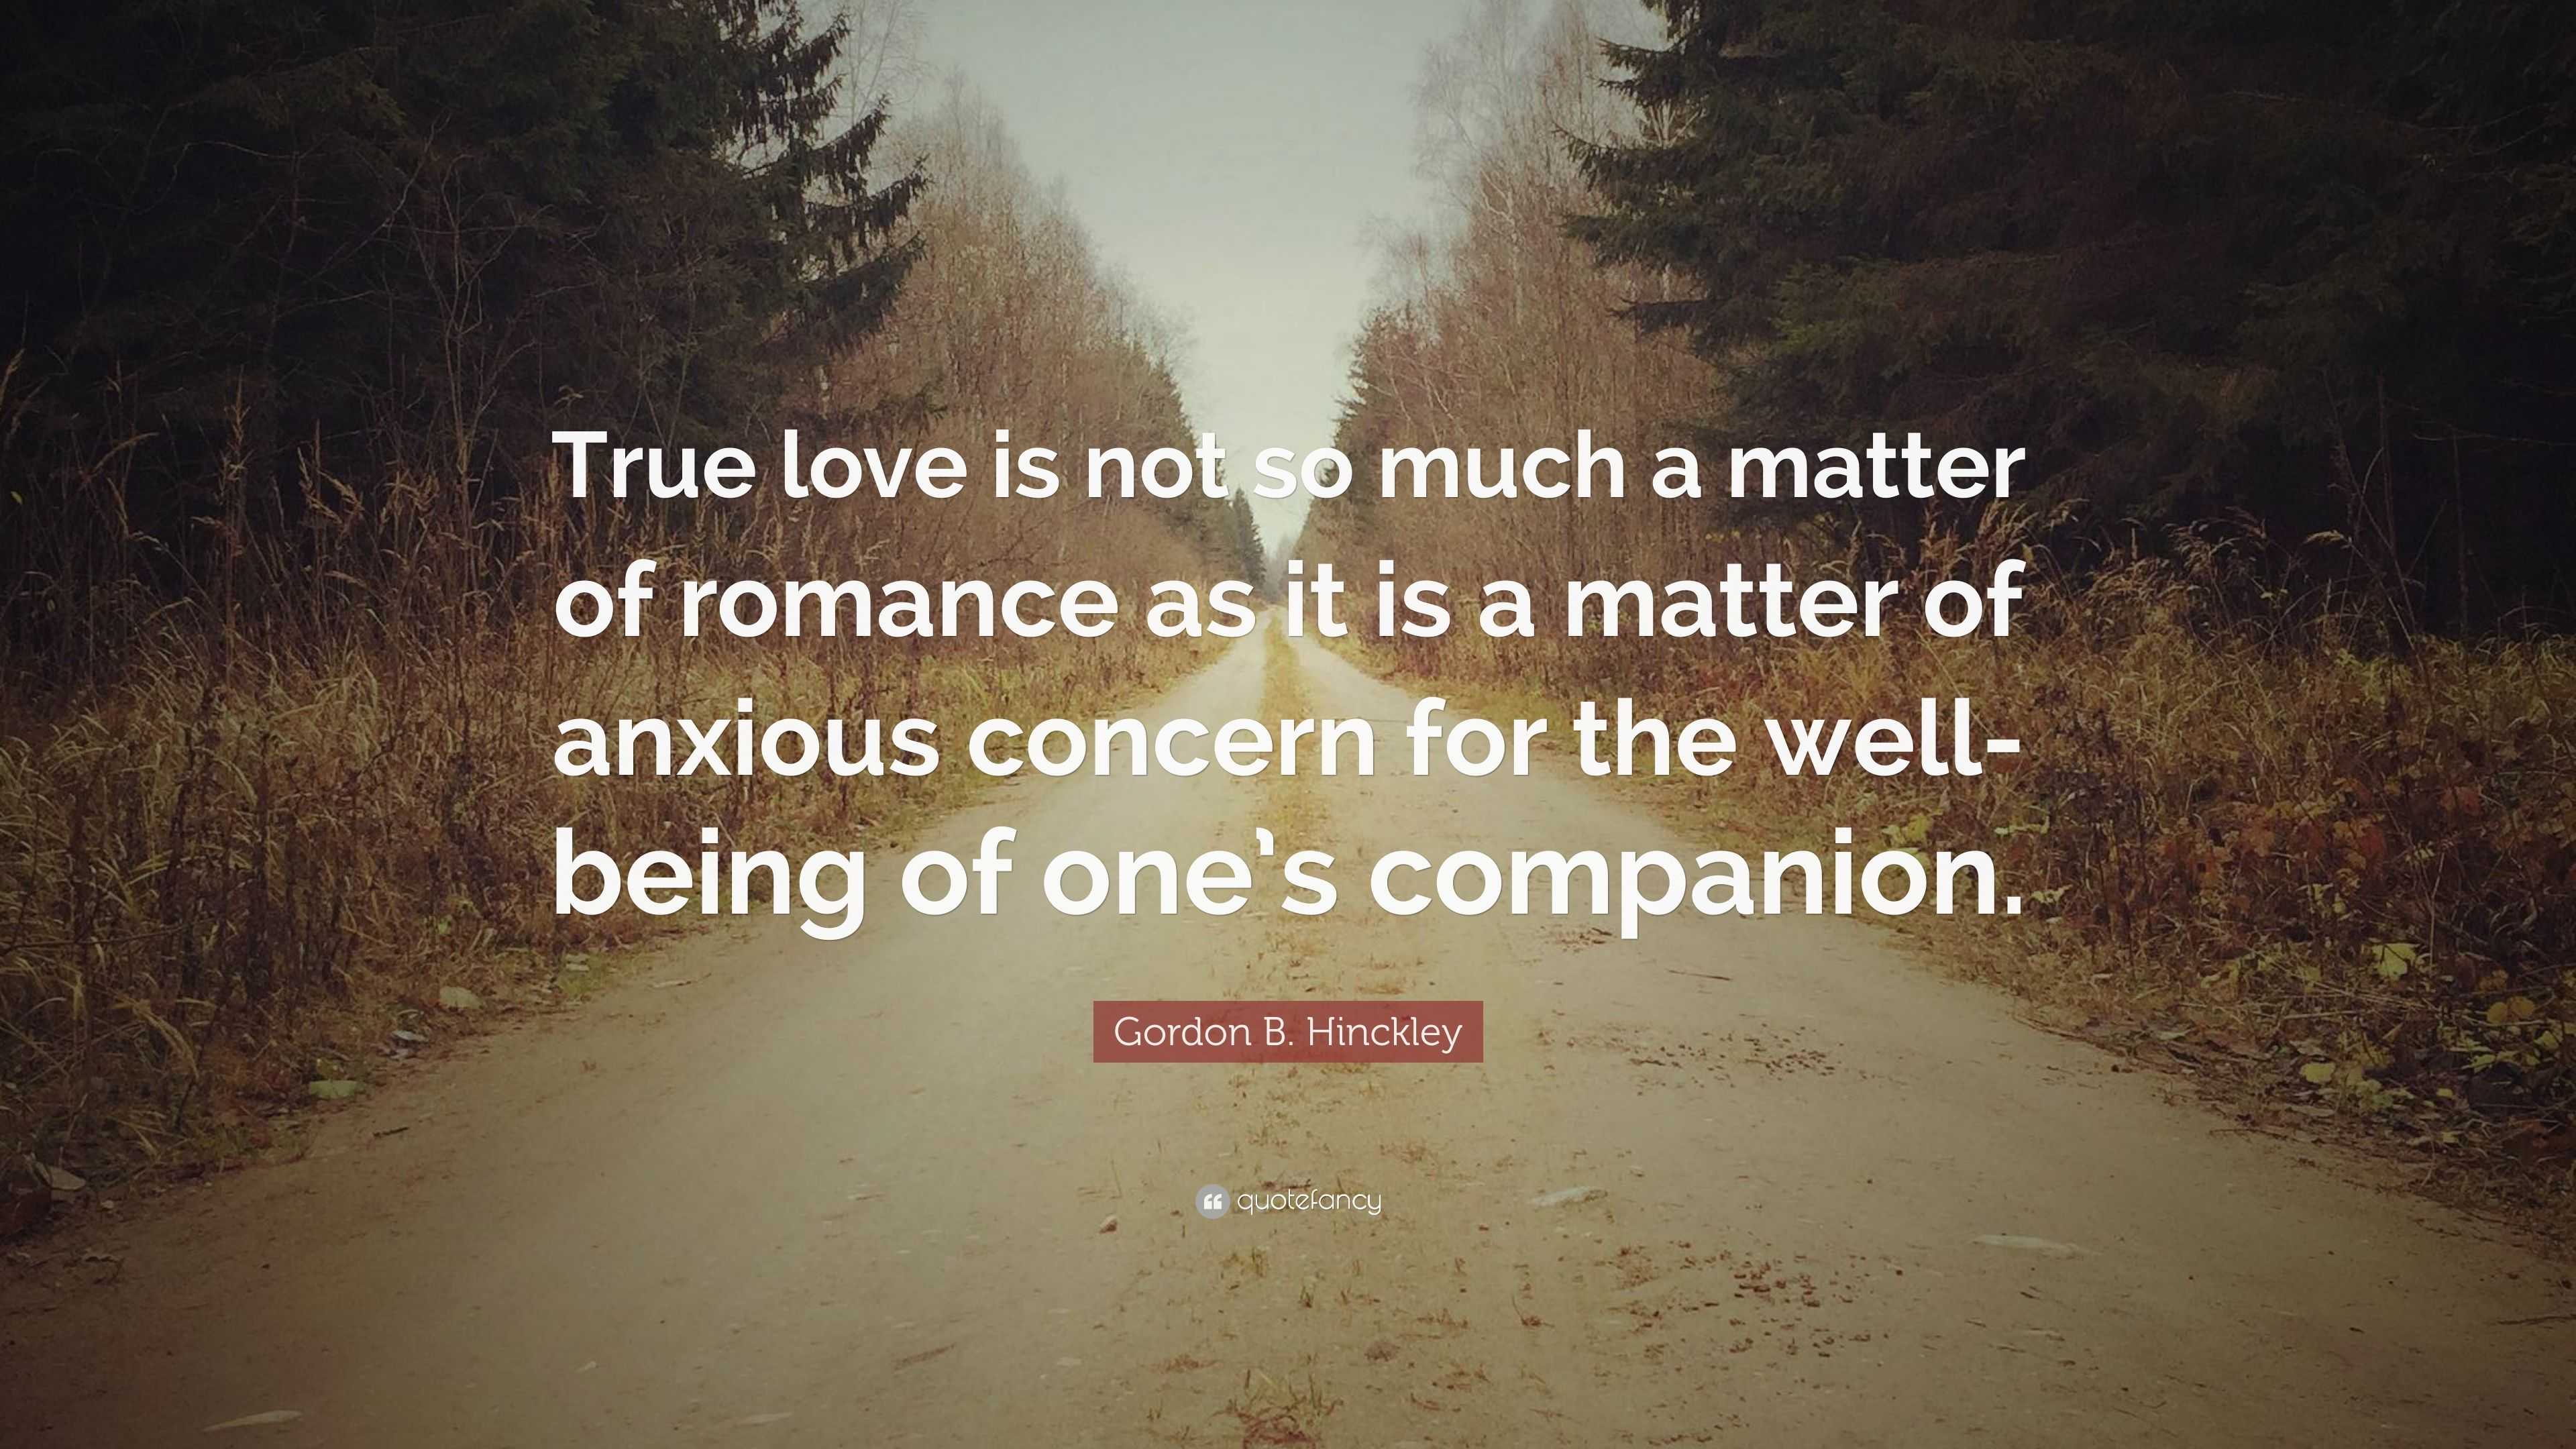 Gordon B Hinckley Quote “True love is not so much a matter of